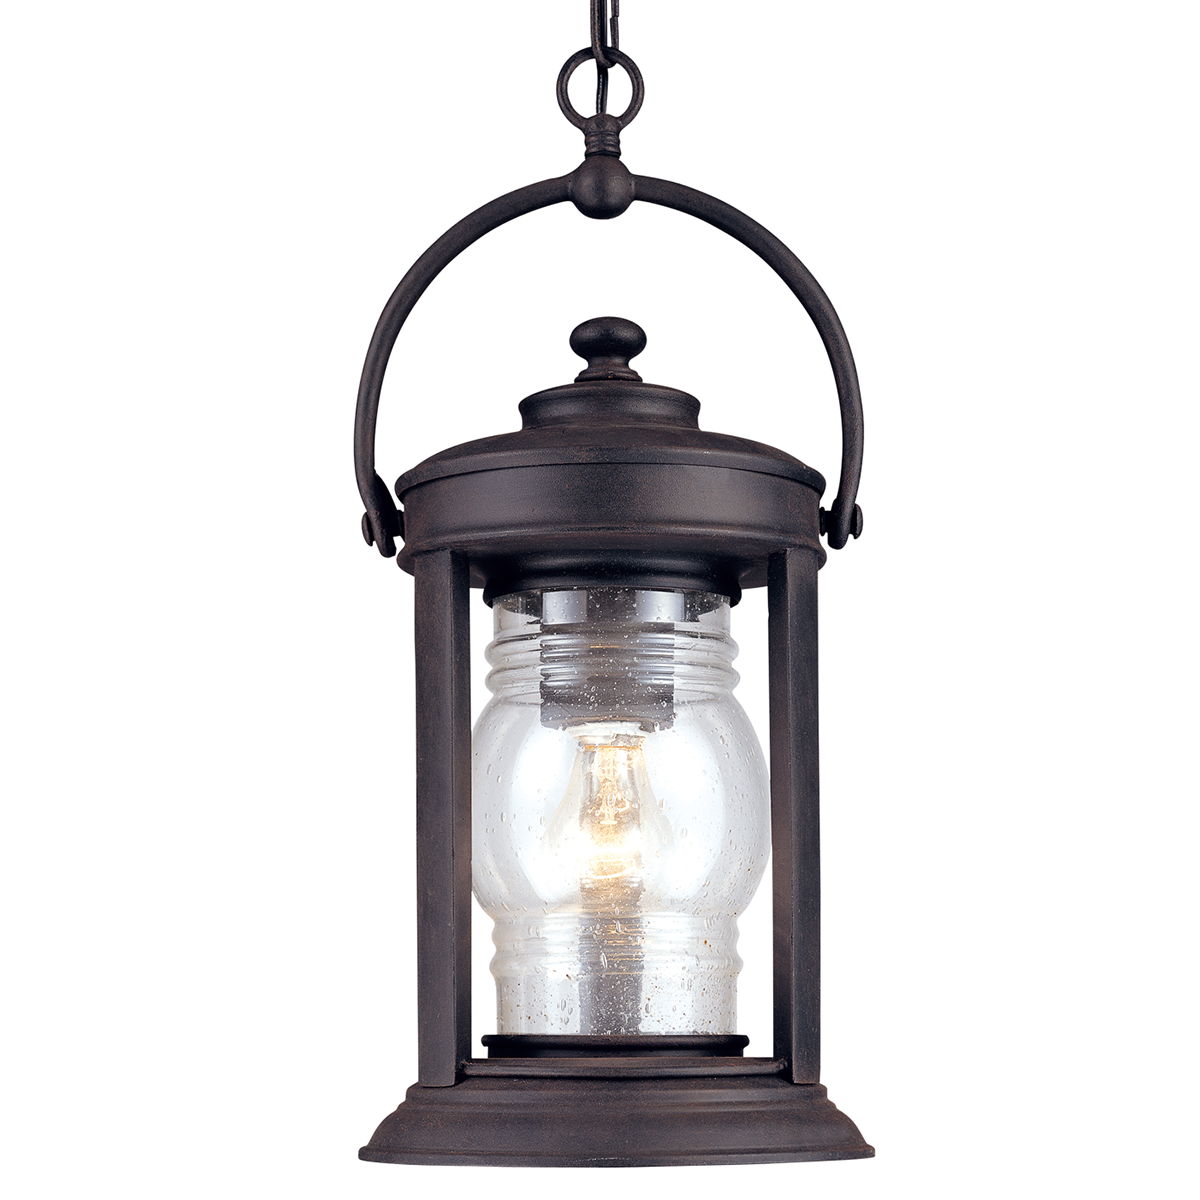 Station Square 1-Light Outdoor Pendant